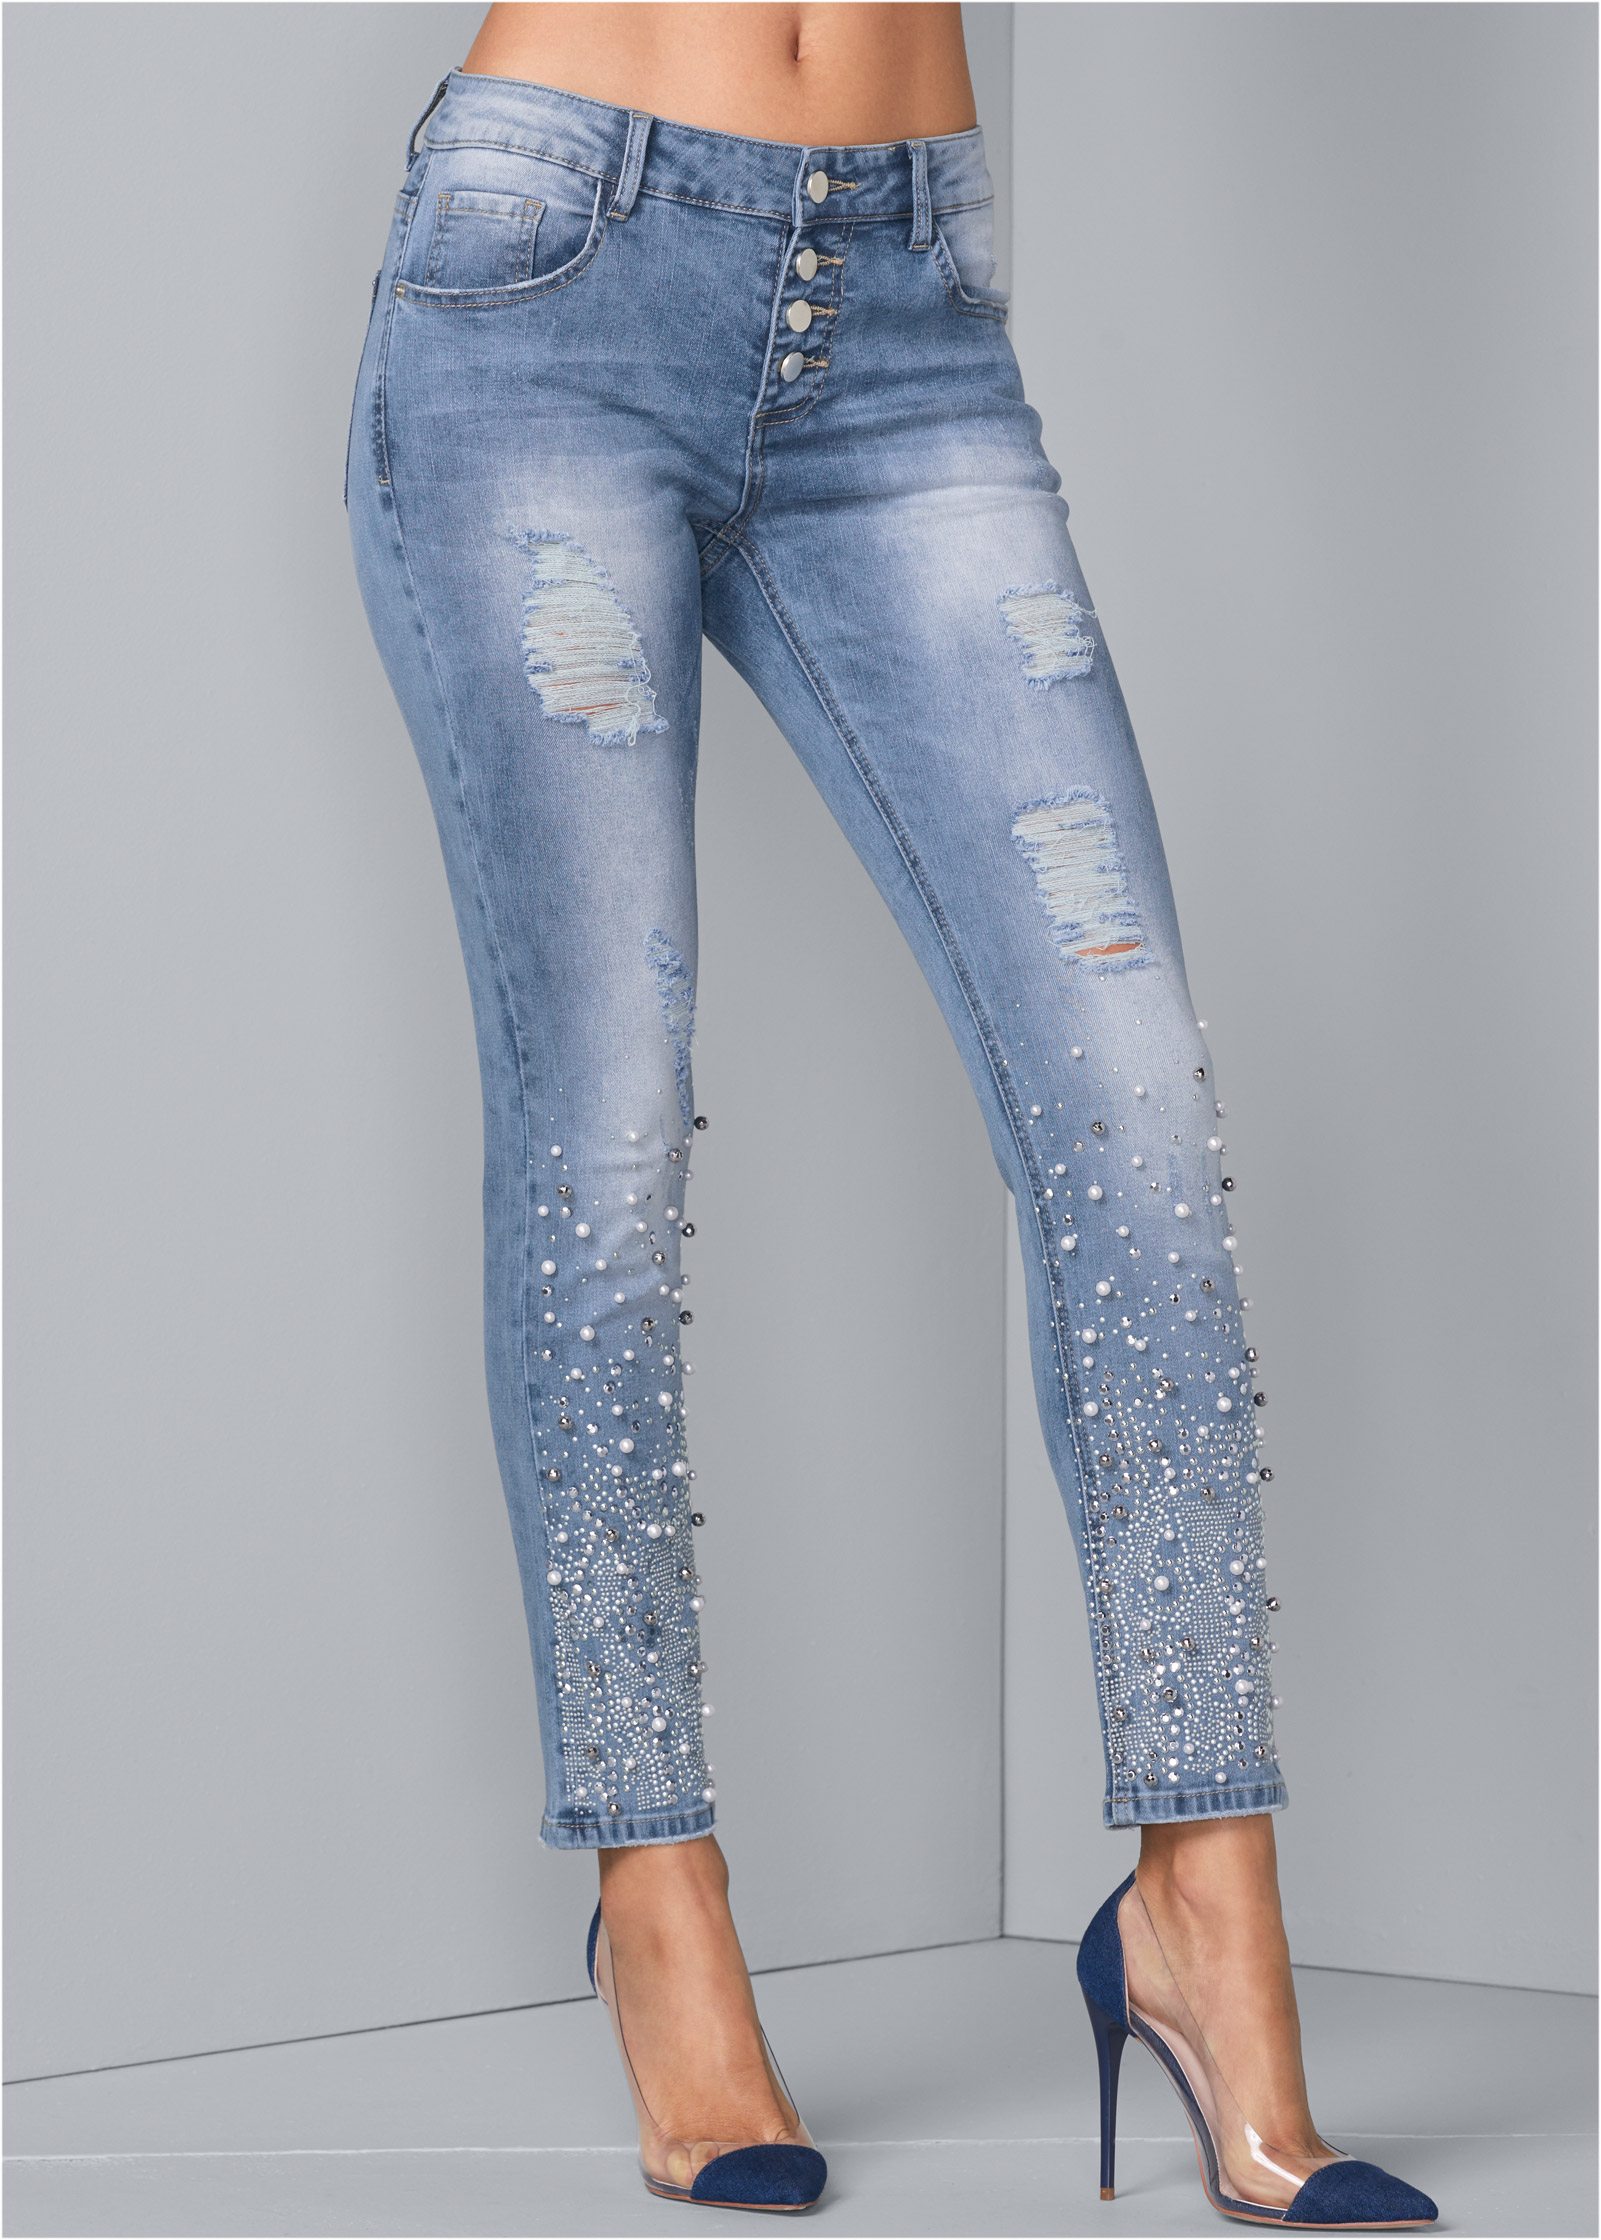 embellished ripped jeans